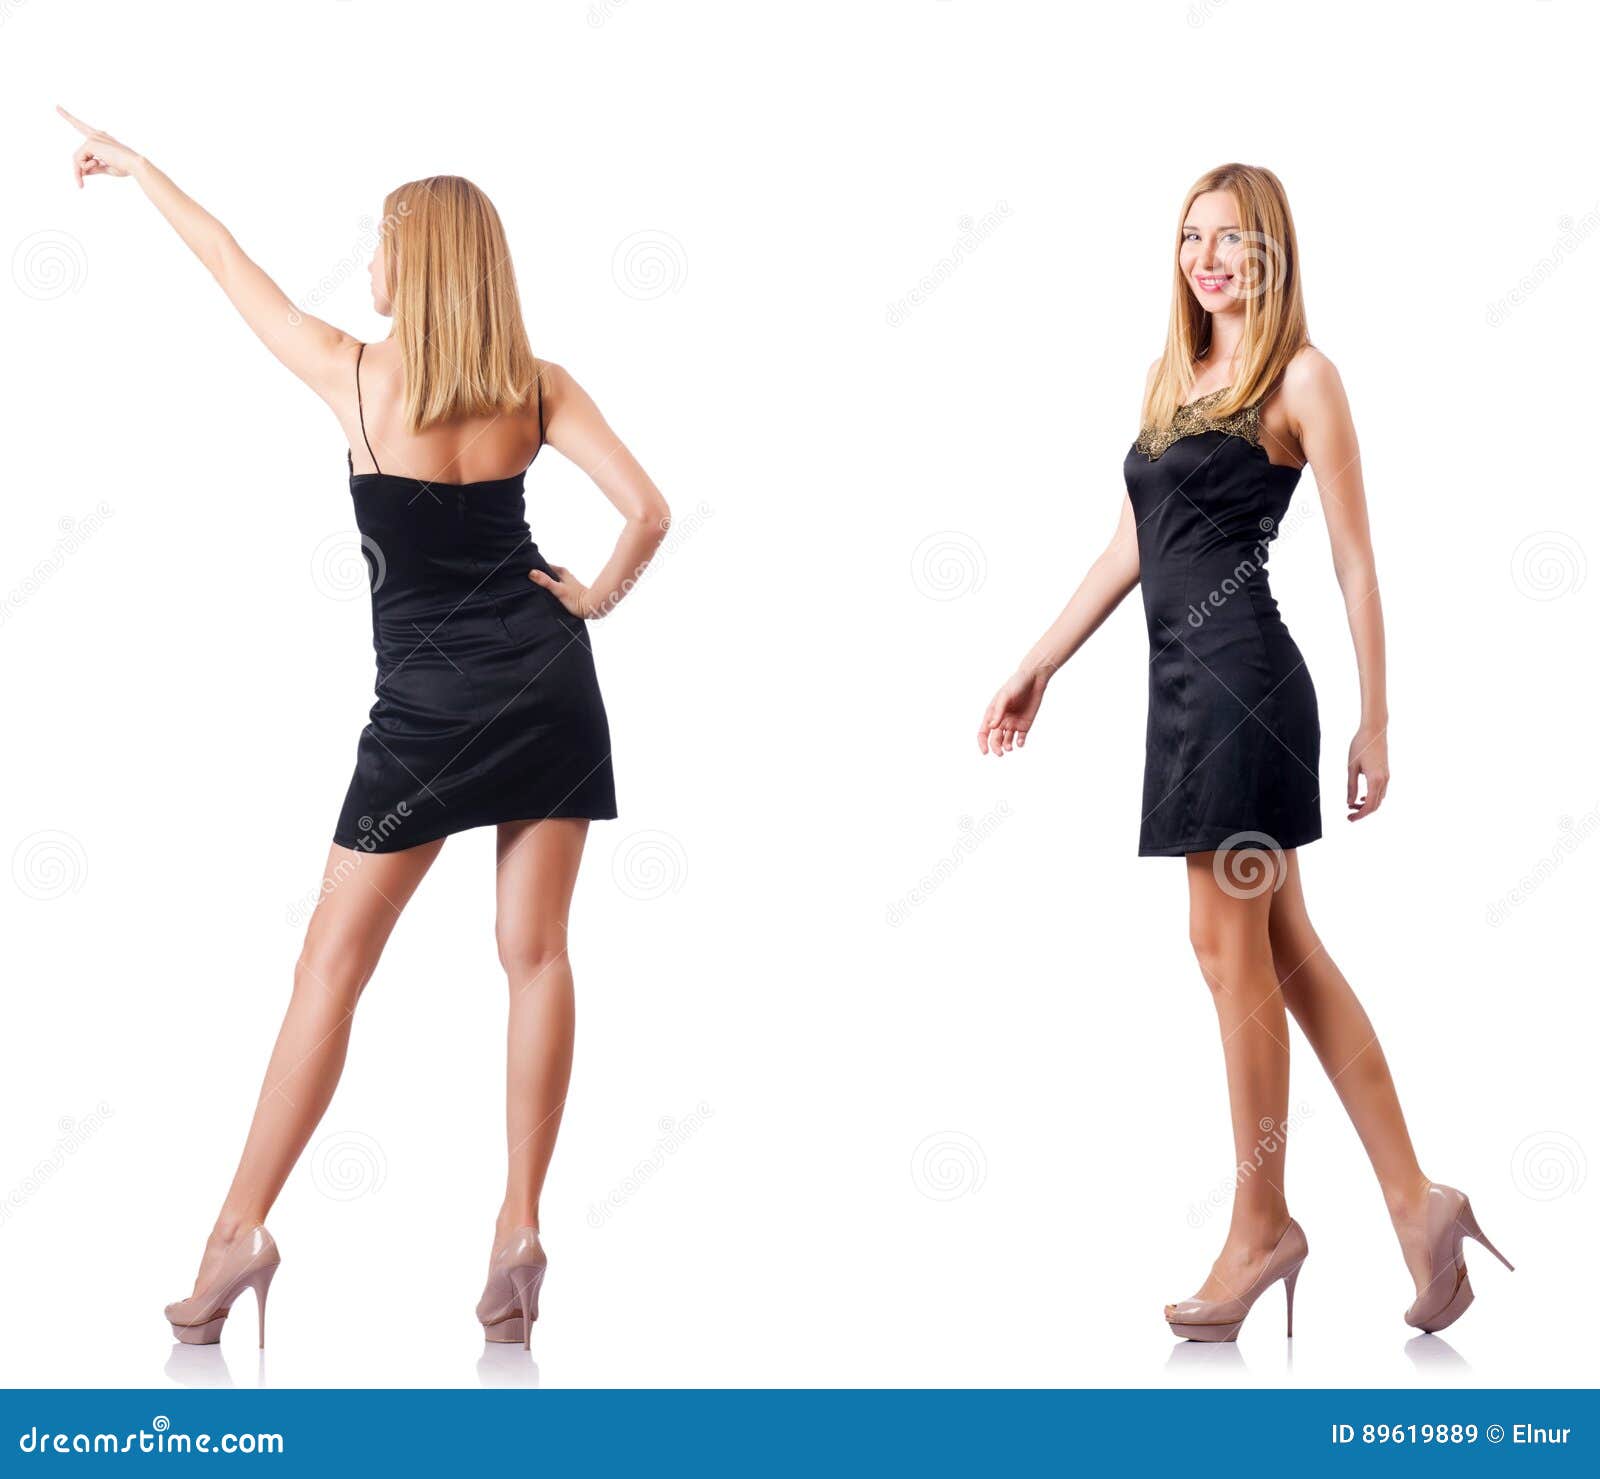 The Tall Model Isolated on the White Background Stock Image - Image of ...